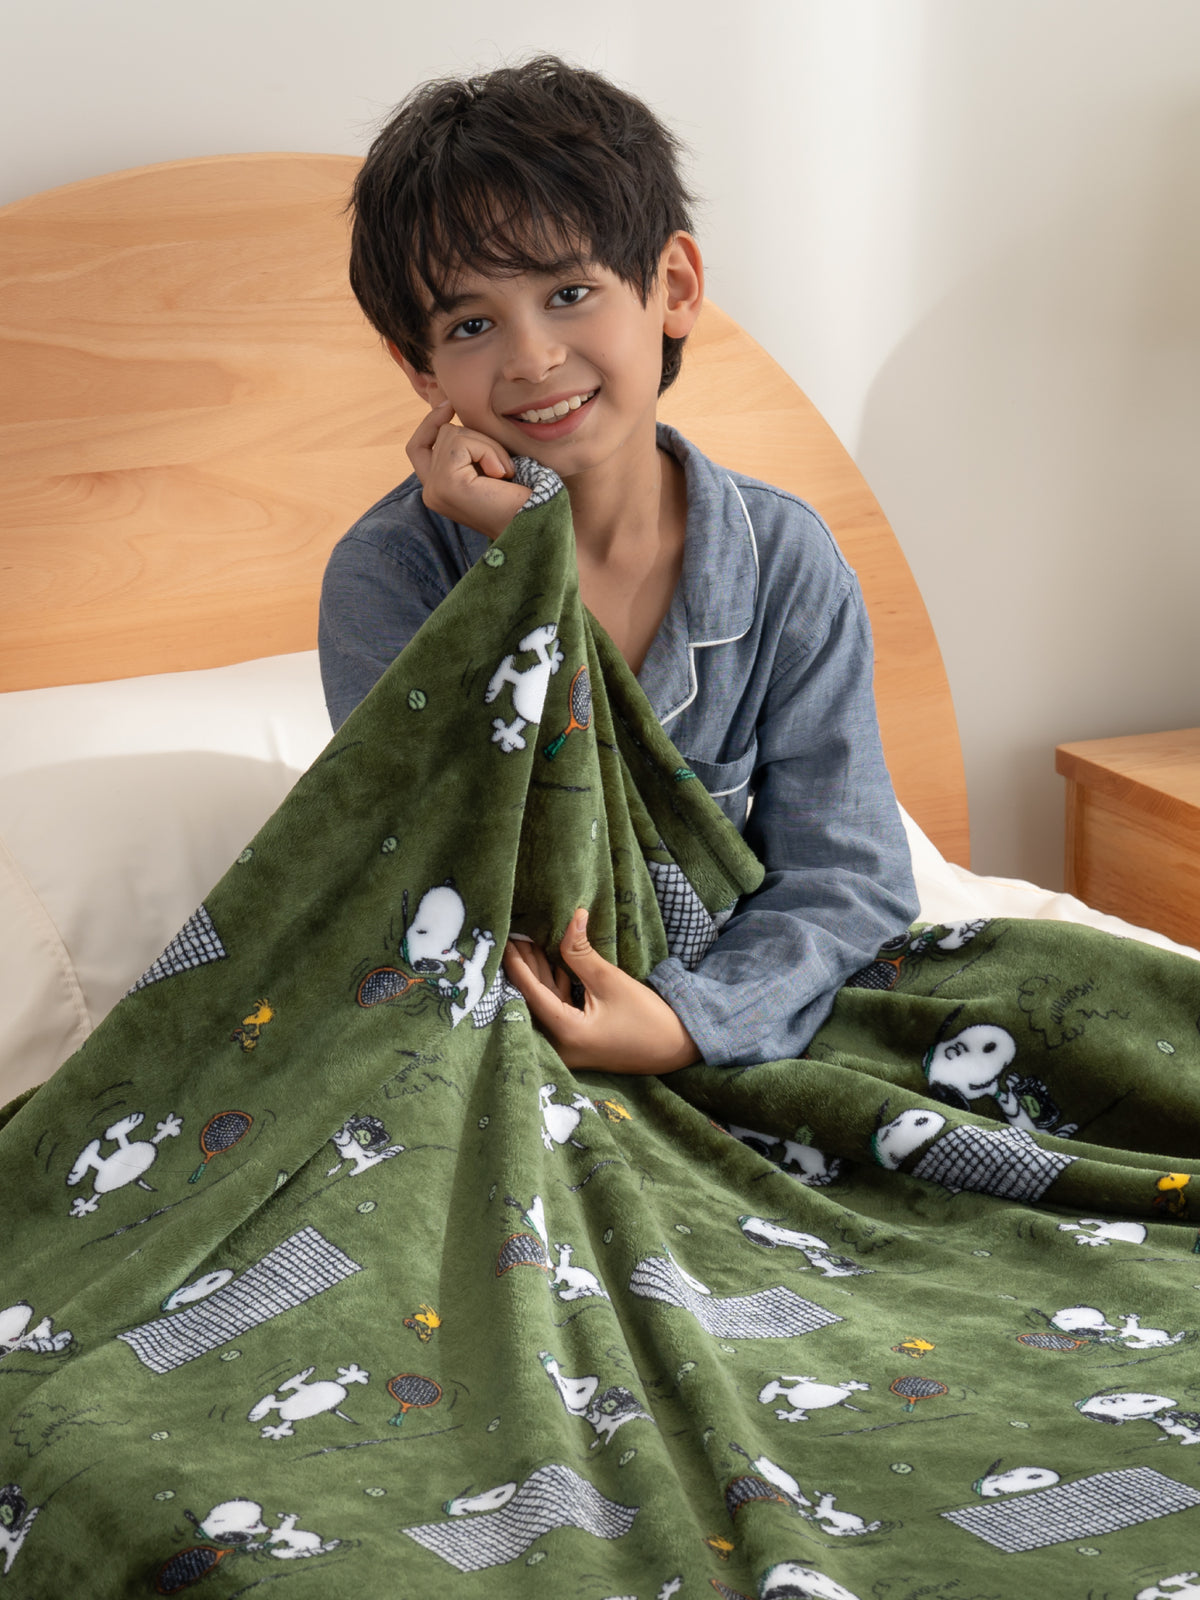 Peanuts collection image featuring our Peanuts VelvetLoft Throw in our Tennis Star print.